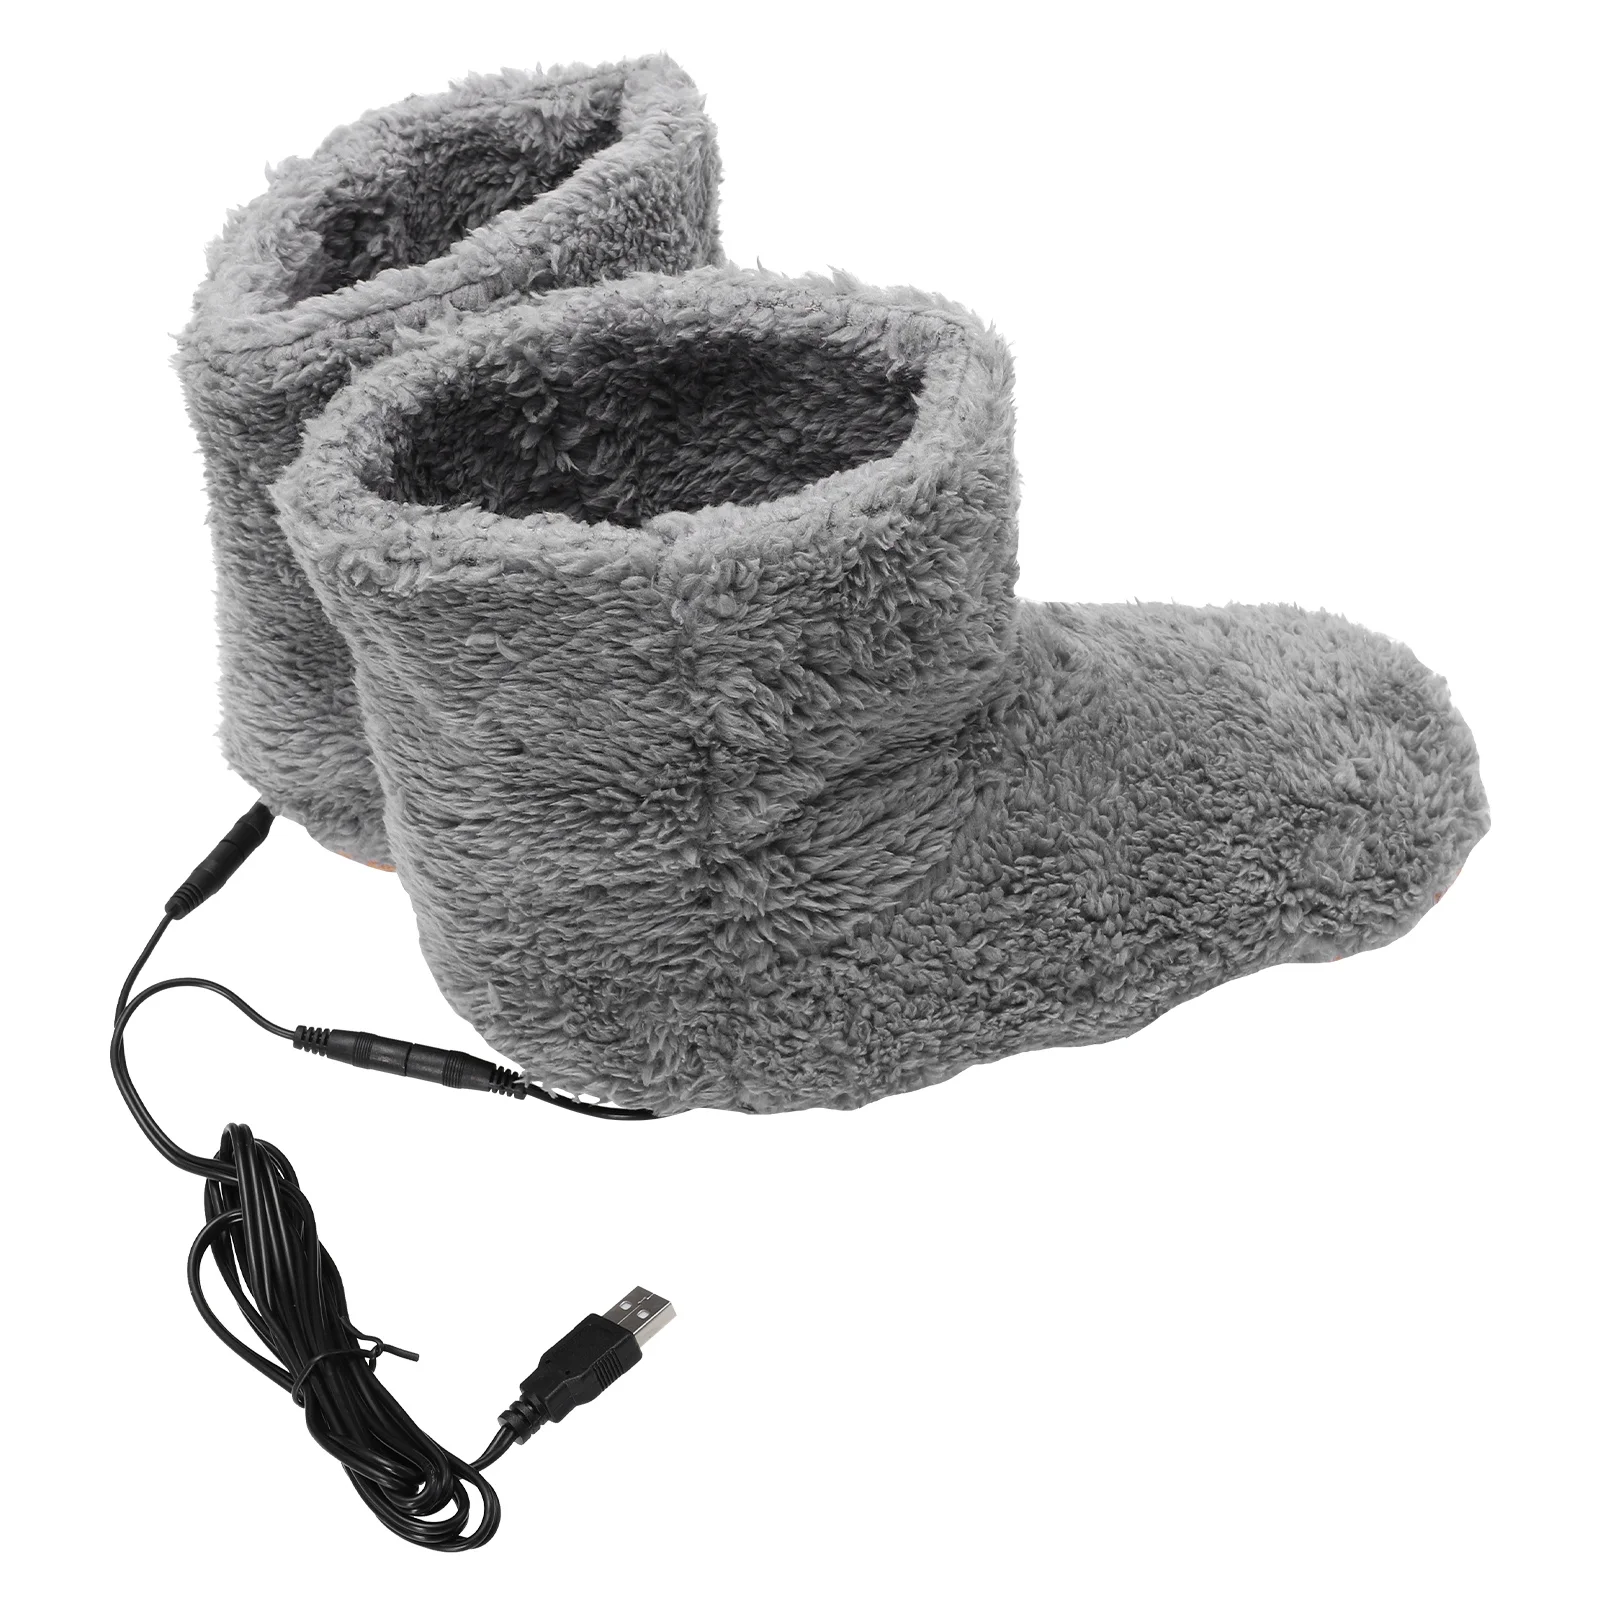 

Warmer Foot Shoes Heated Heating Electricfeet Slippers Warmers Boots Warm Heat Pad Practical Usb Fast Slipper Heaterwinter Soft